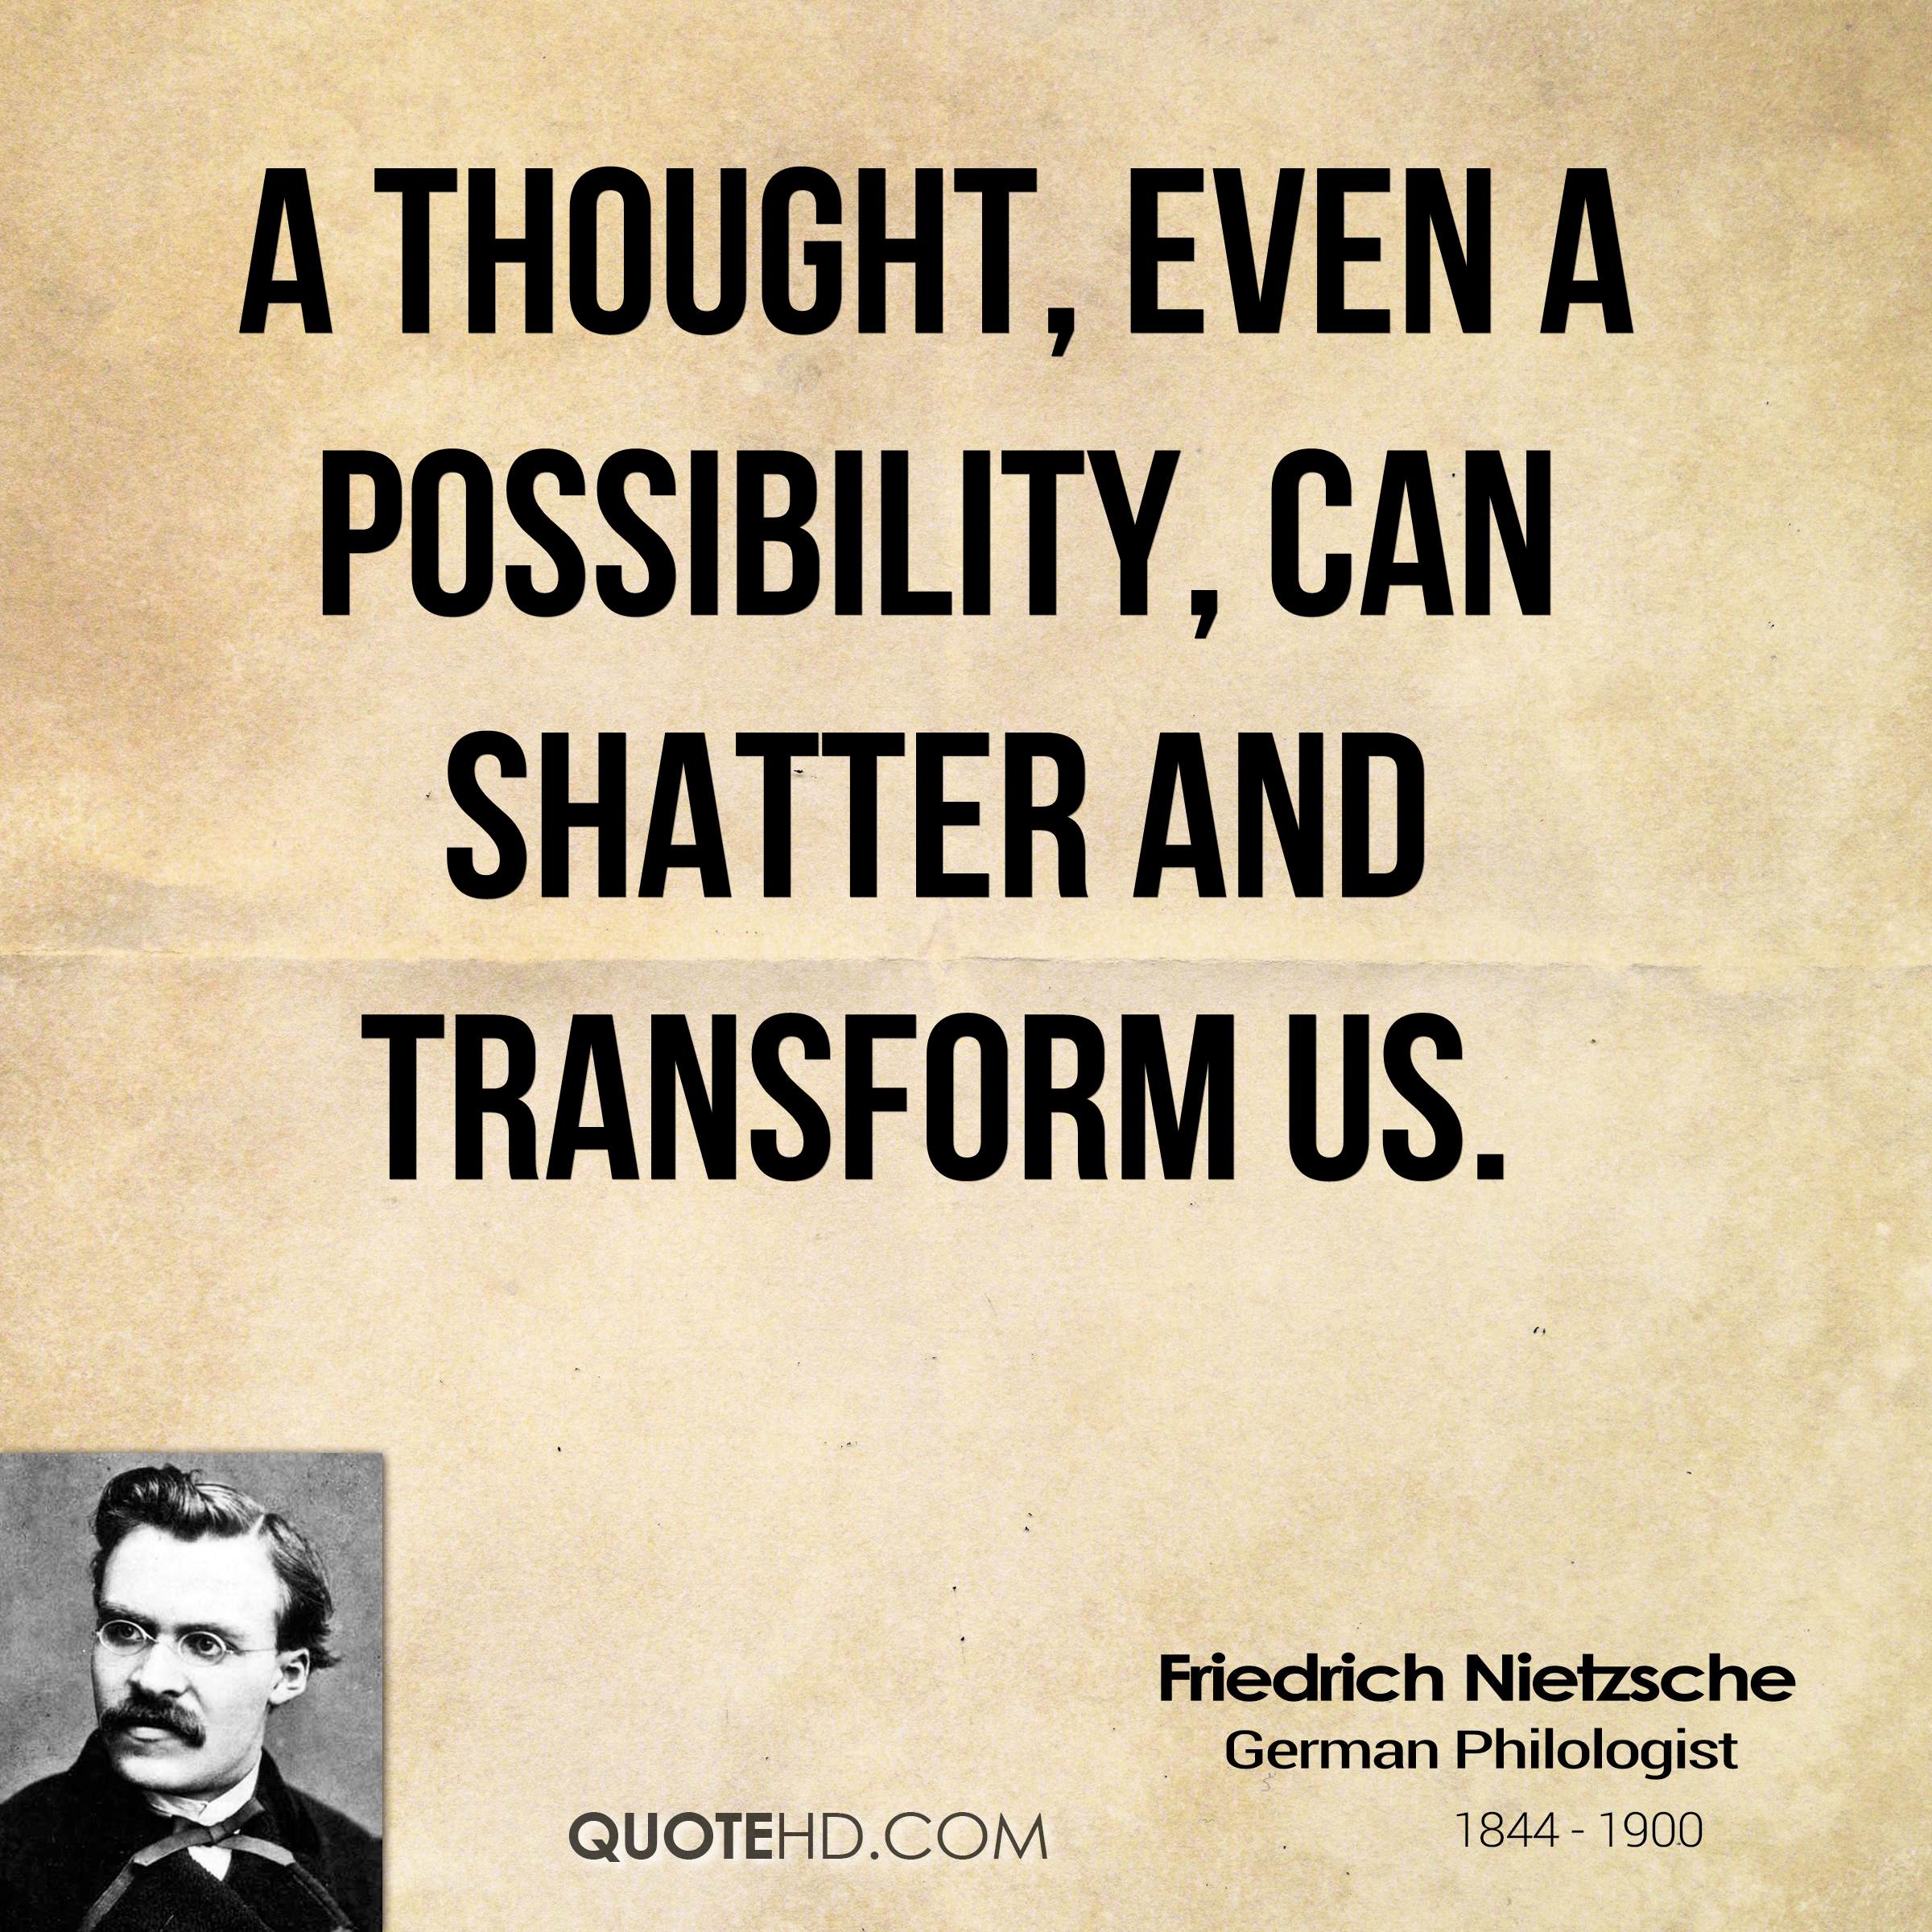 A thought, even a possibility, can shatter and transform us. Friedrich Nietzsche